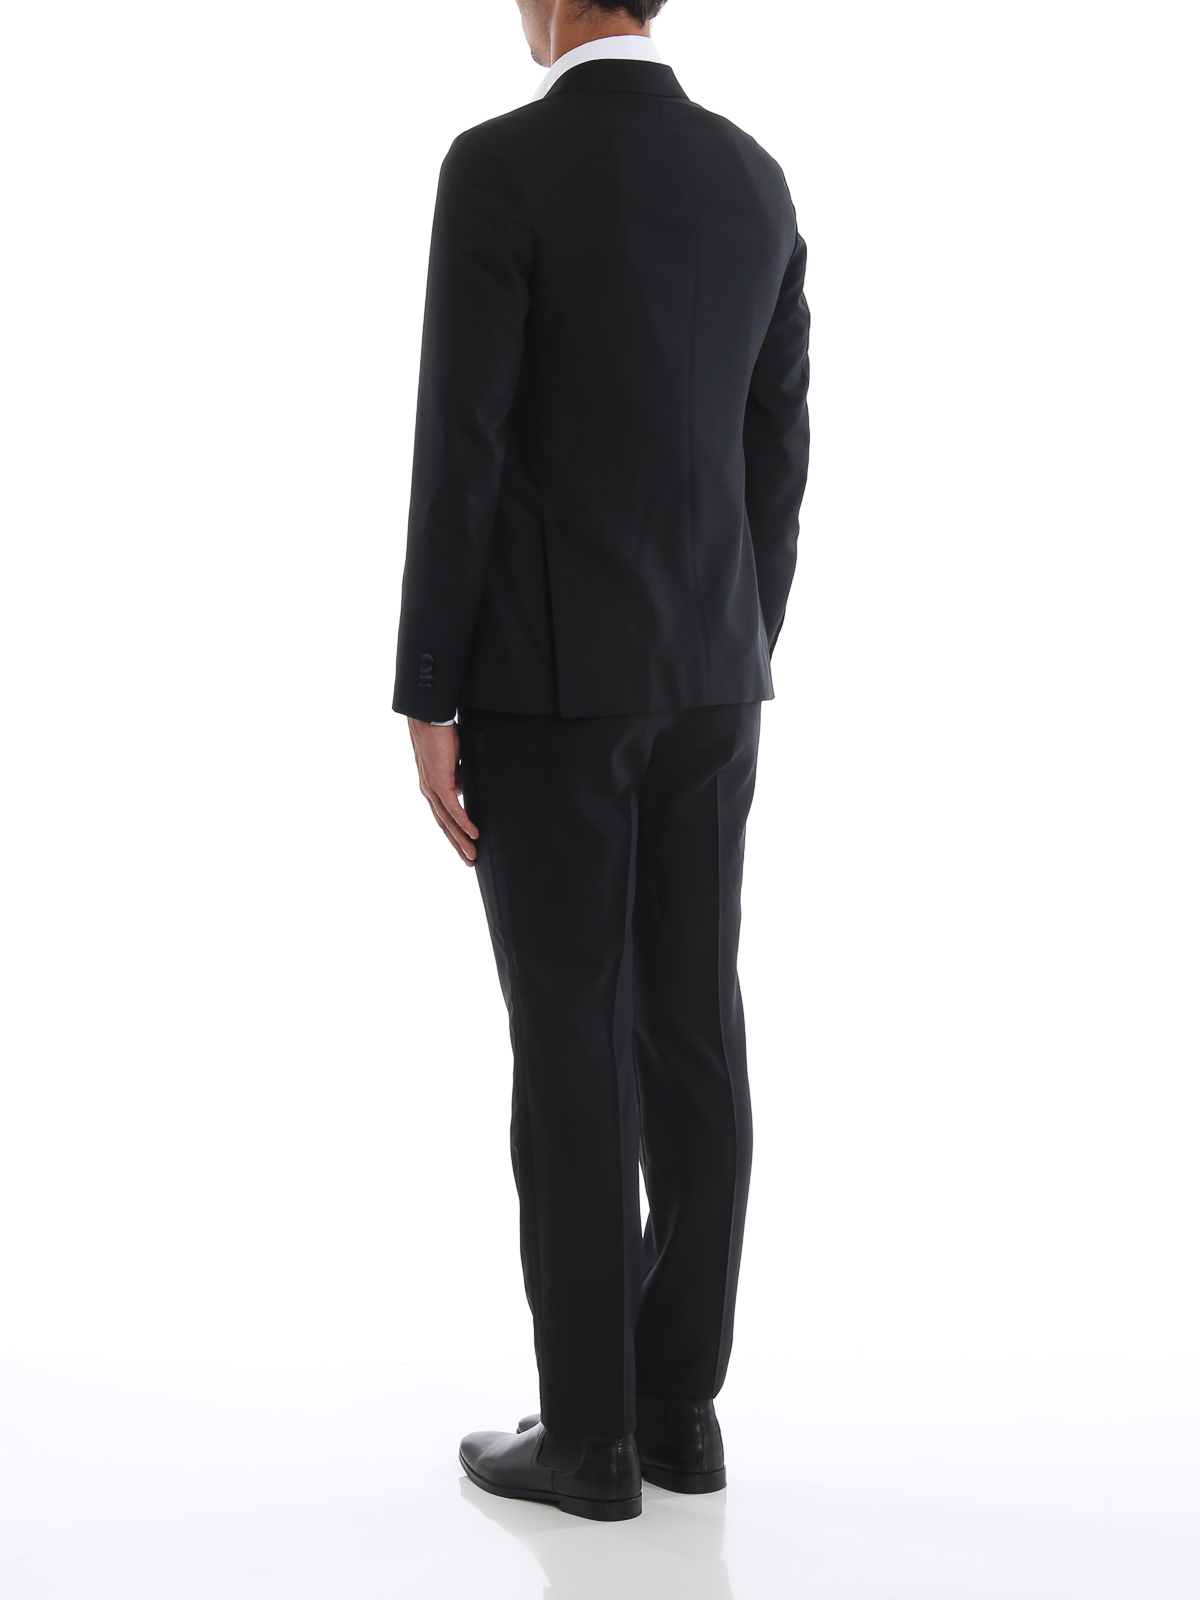 Dinner suits Z Zegna - Moscova black double-breasted smoking suit -  4228882GEZGR8R